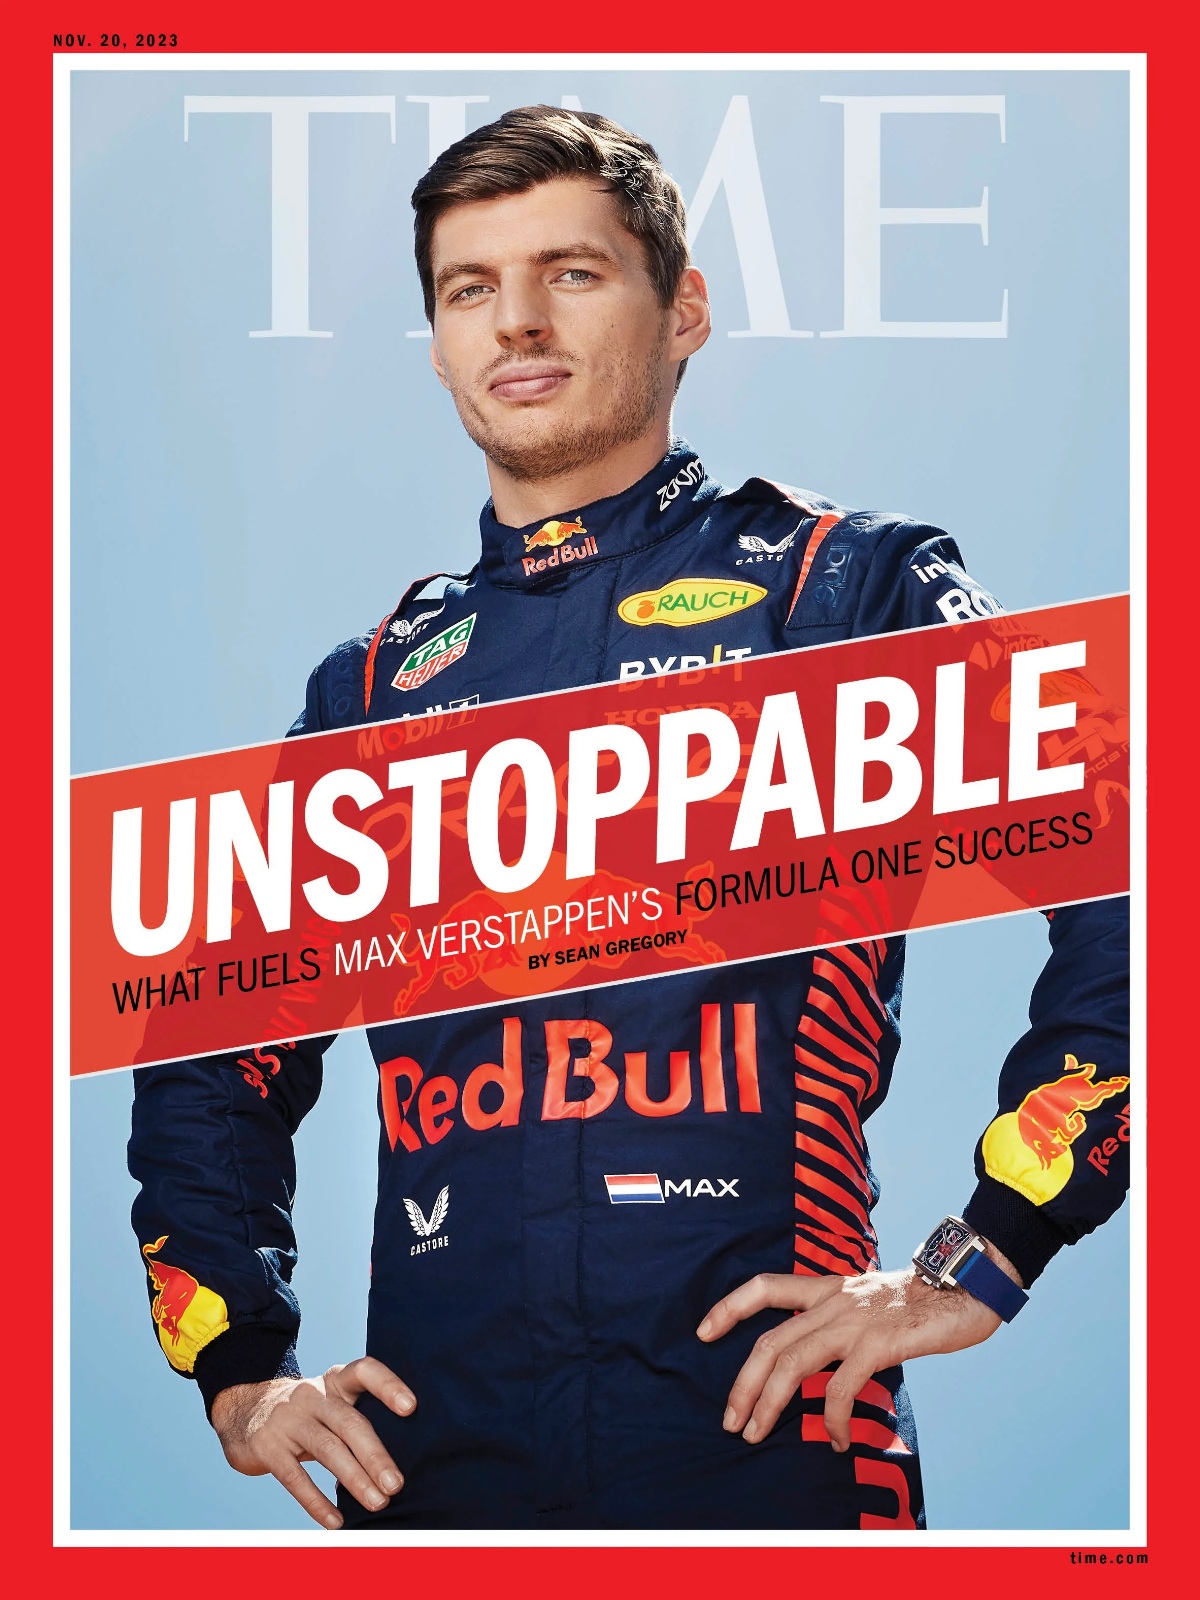 Max Verstappen - Unstoppable on Cover of Time Magazine